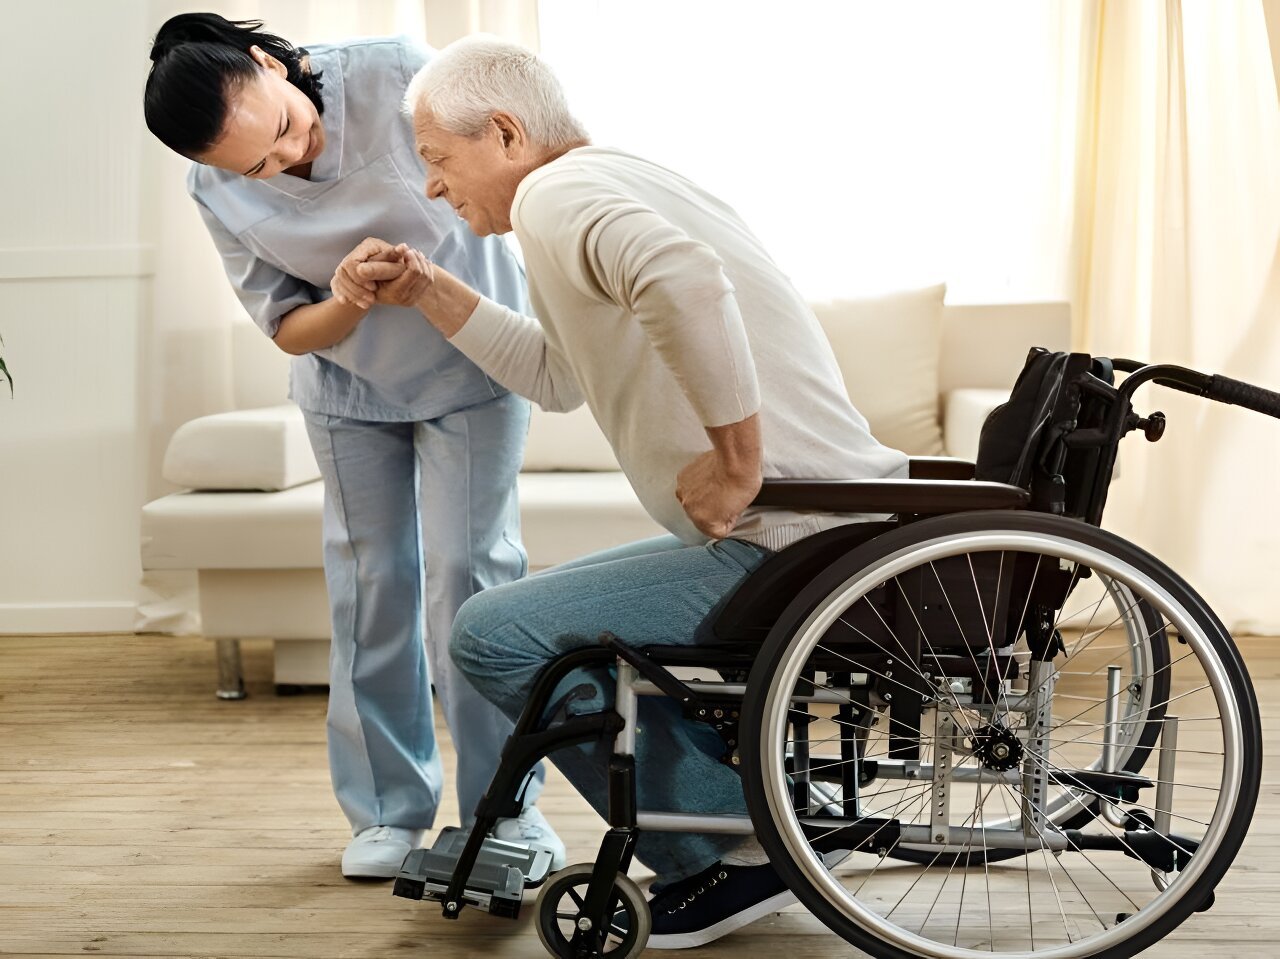 Staffing shortages at nursing homes continue: Report